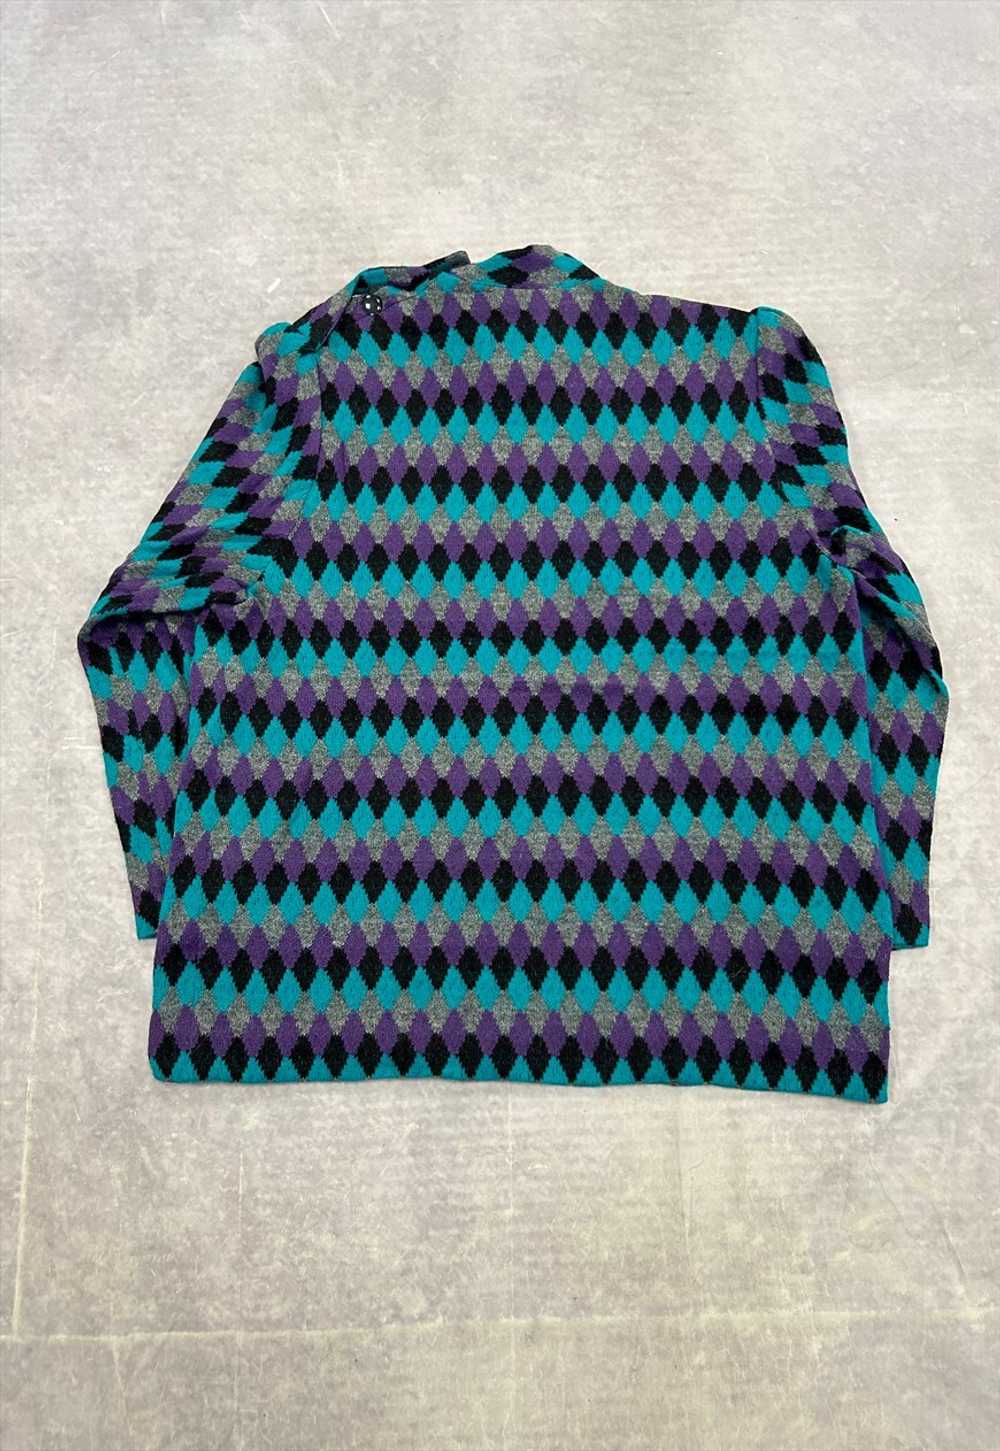 Vintage Knitted Jumper Fun Abstract Patterned Kni… - image 5